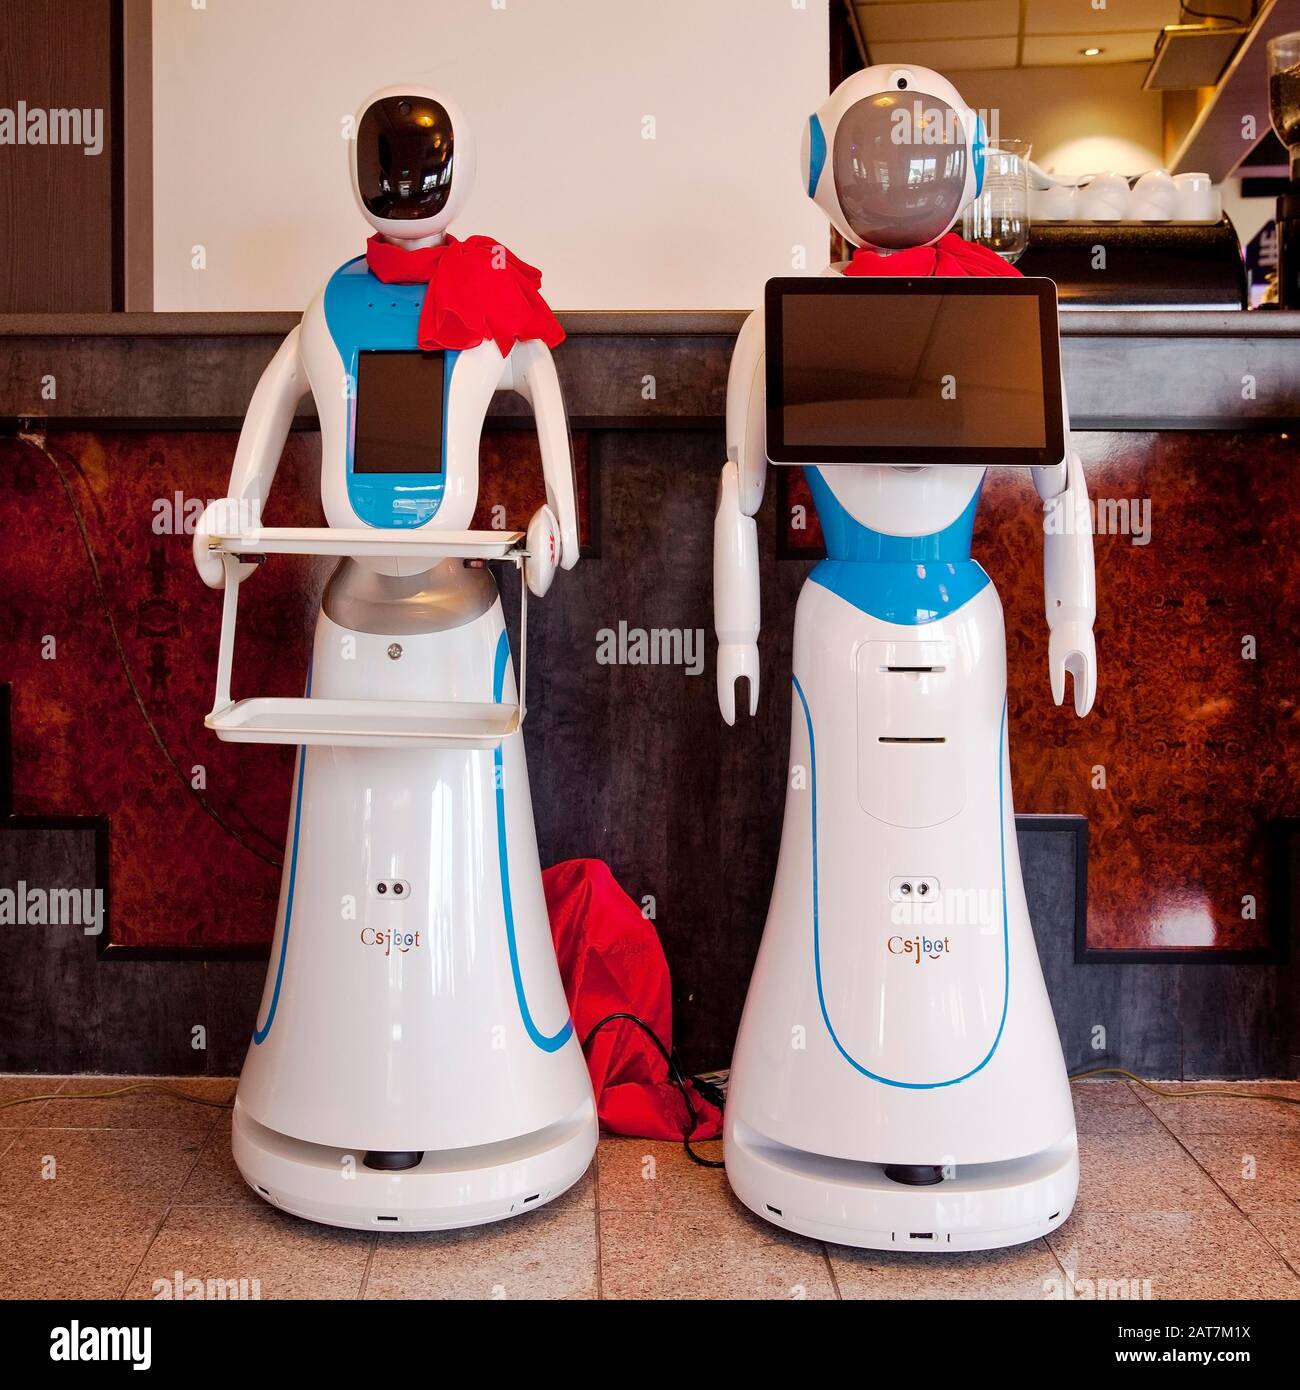 Two catering service robots in a Chinese restaurant, Germany Stock Photo